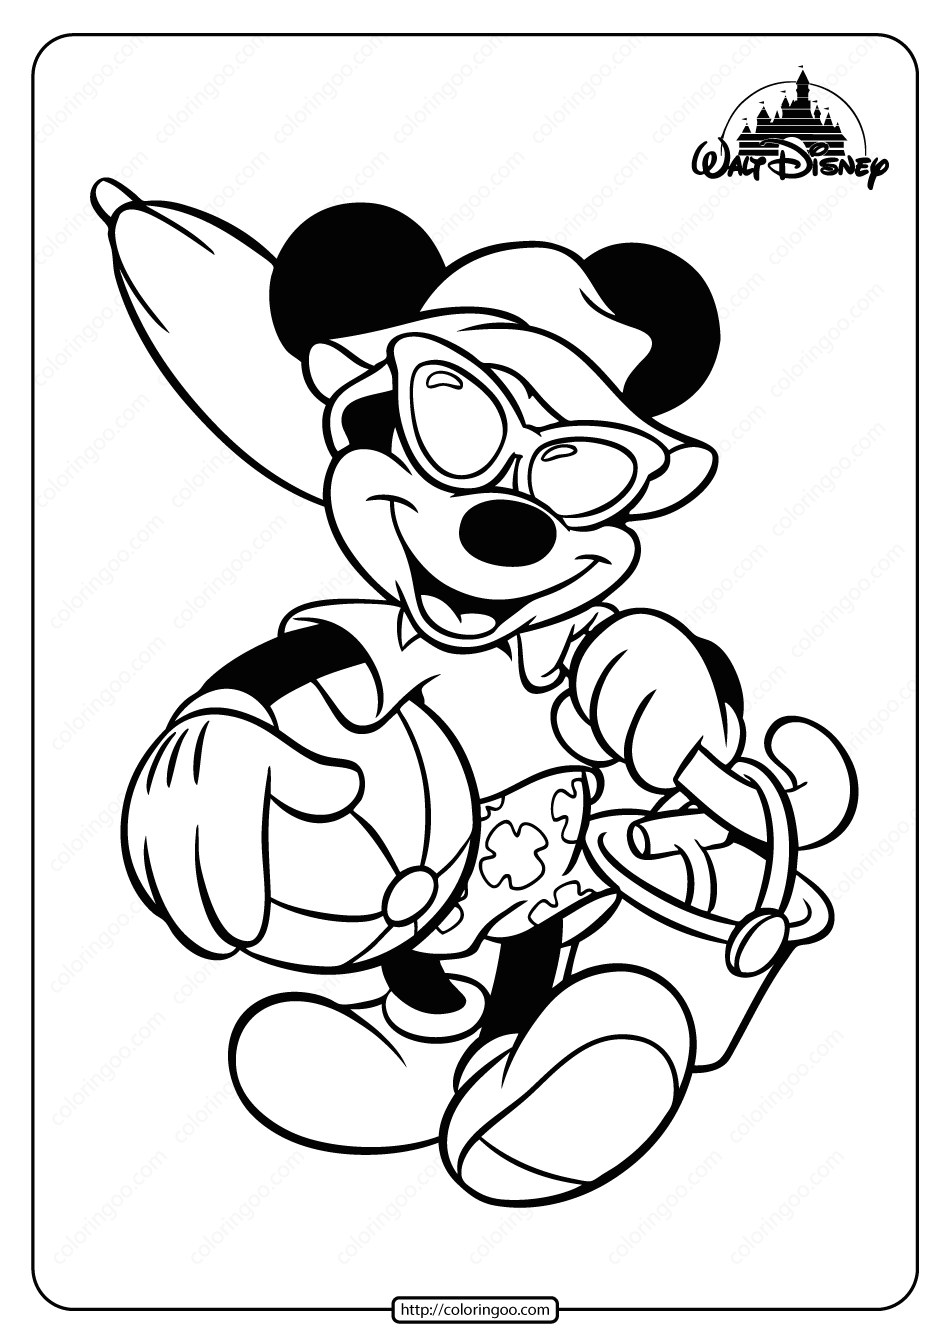 free printable mickey mouse beach fun coloring page